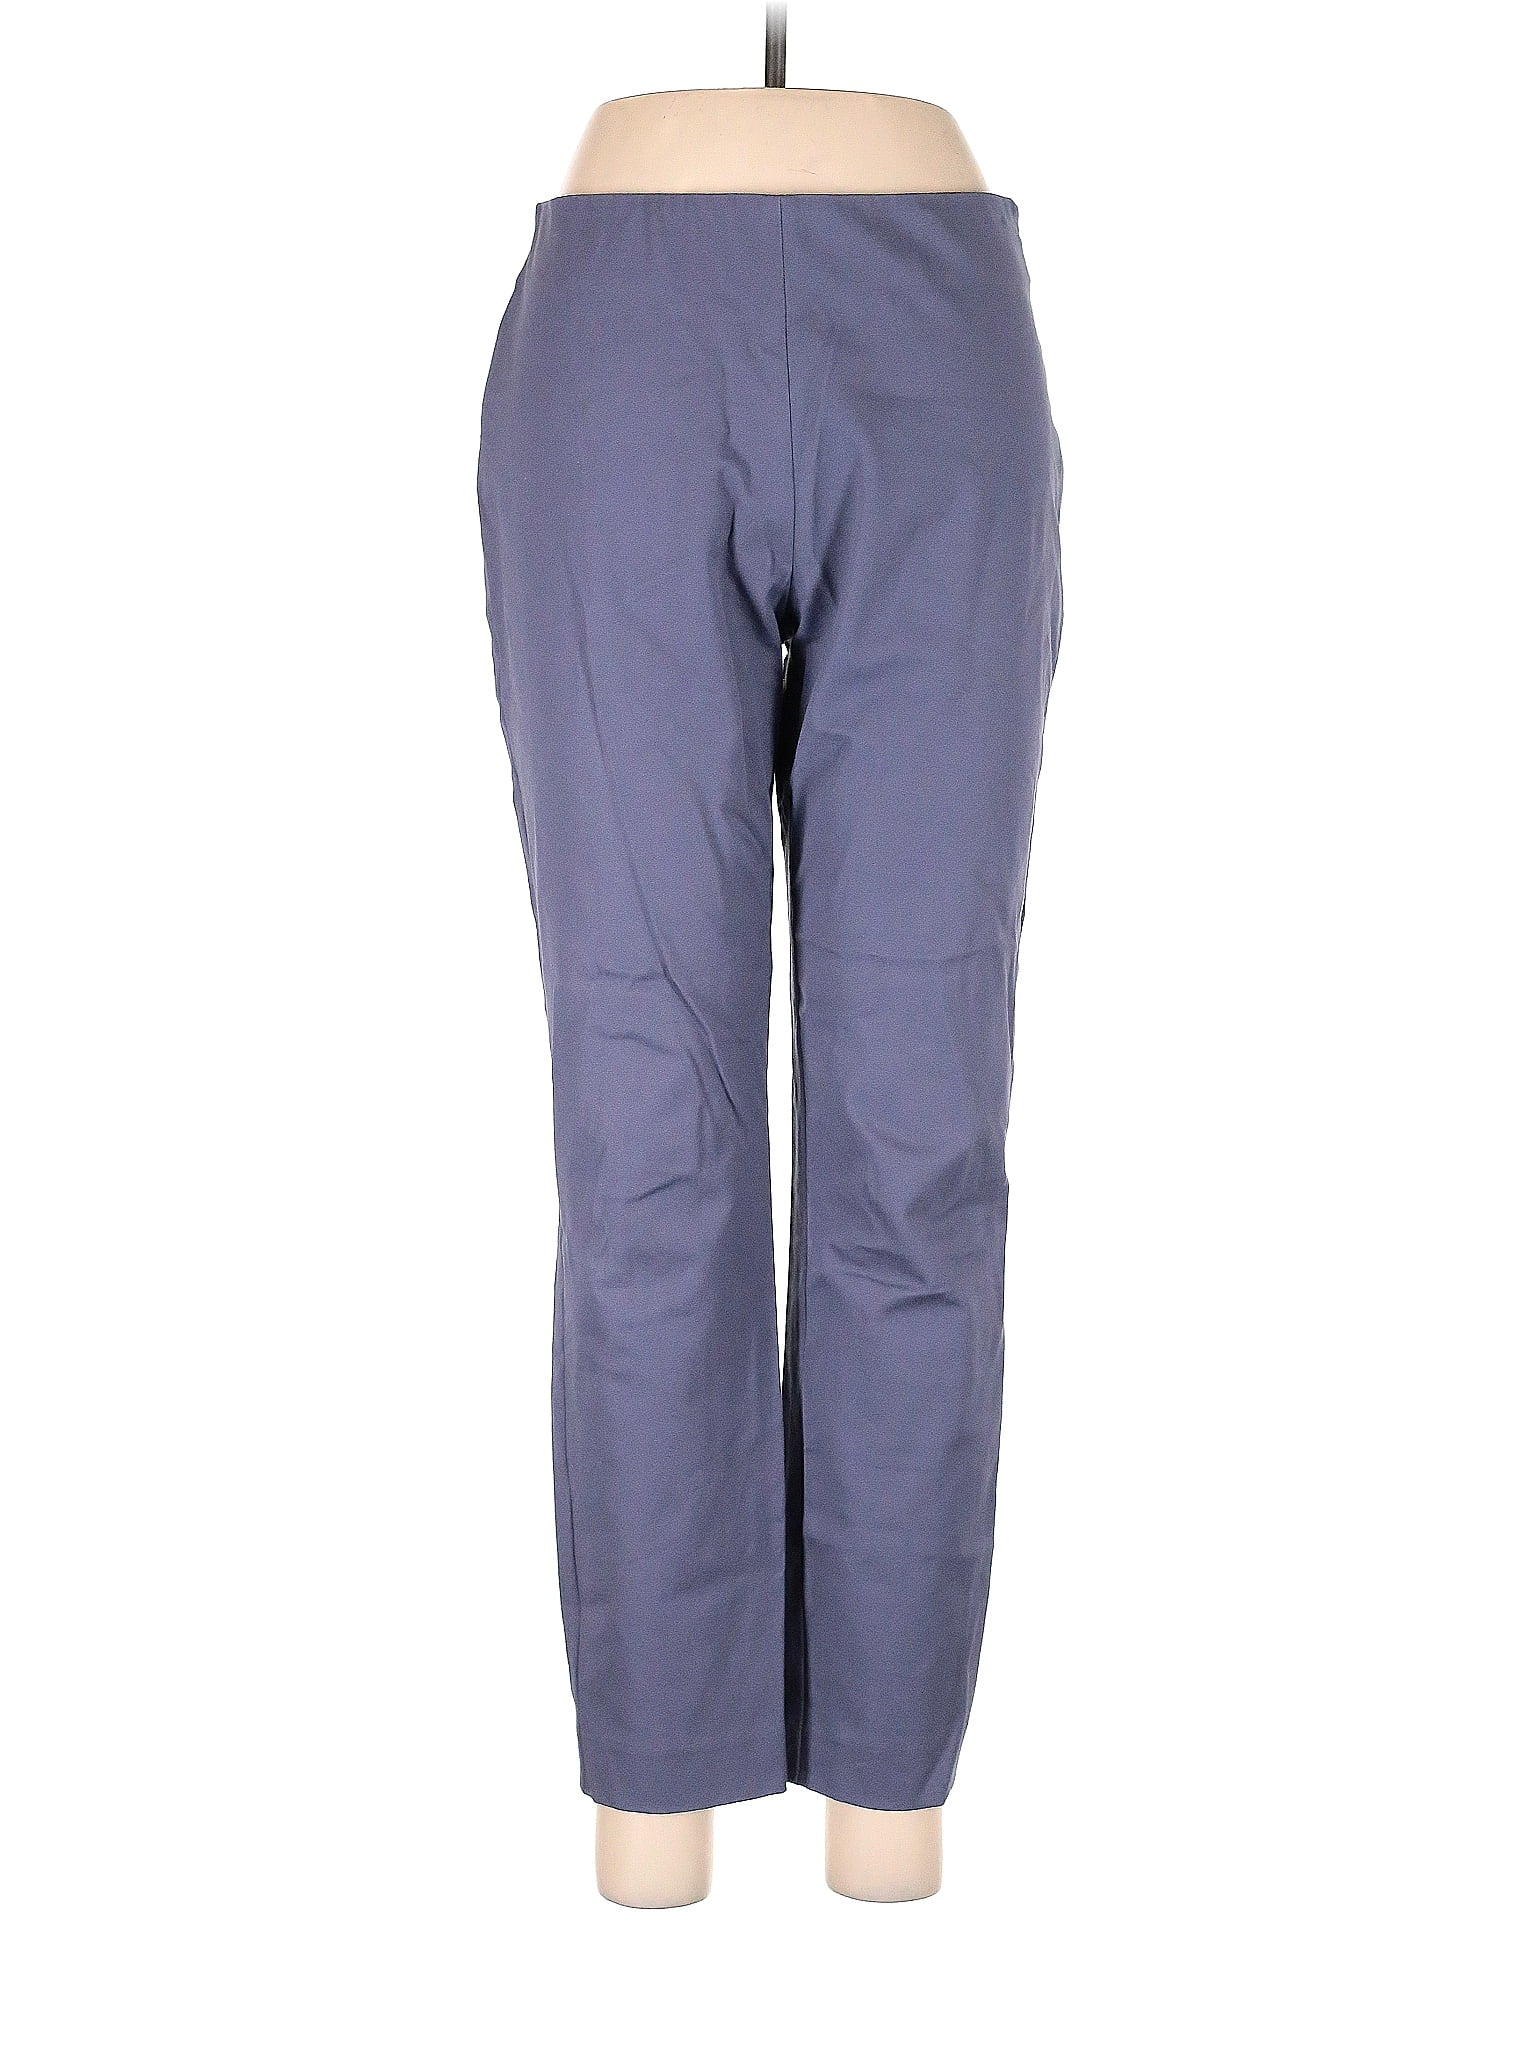 A New Day Blue Dress Pants Size 6 - 50% off